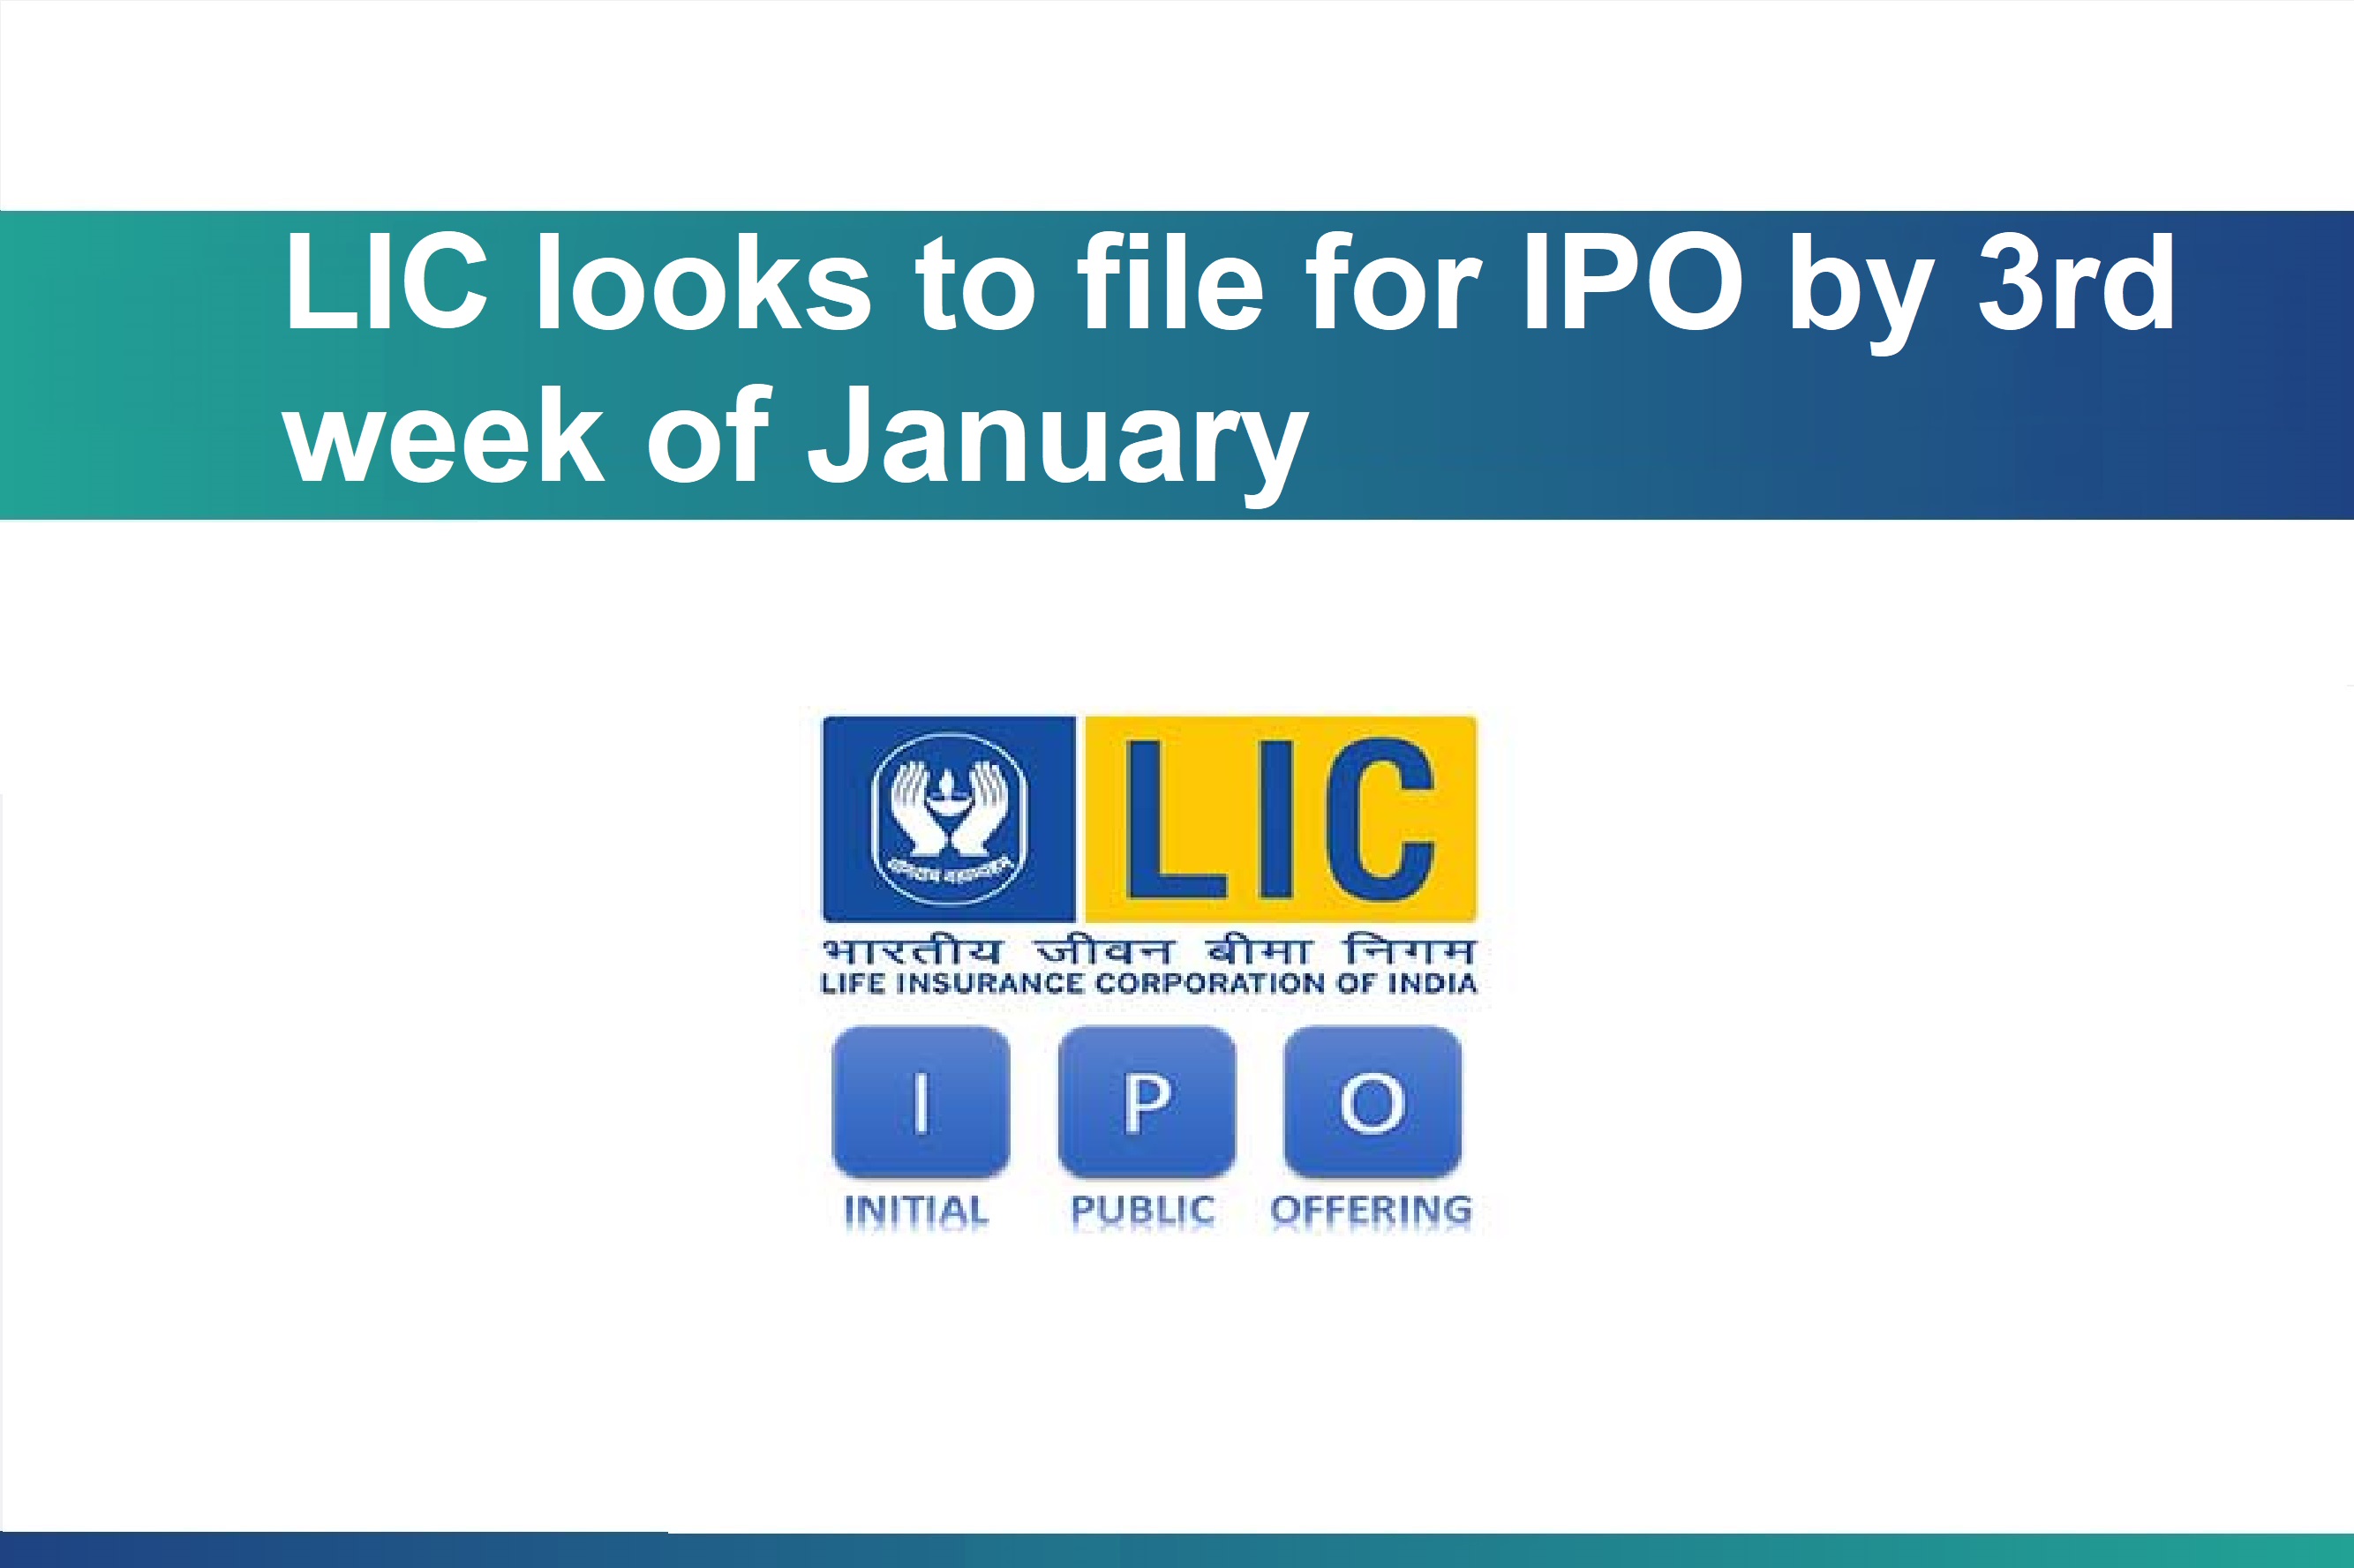 LIC looks to file for IPO by 3rd week of January, said officials